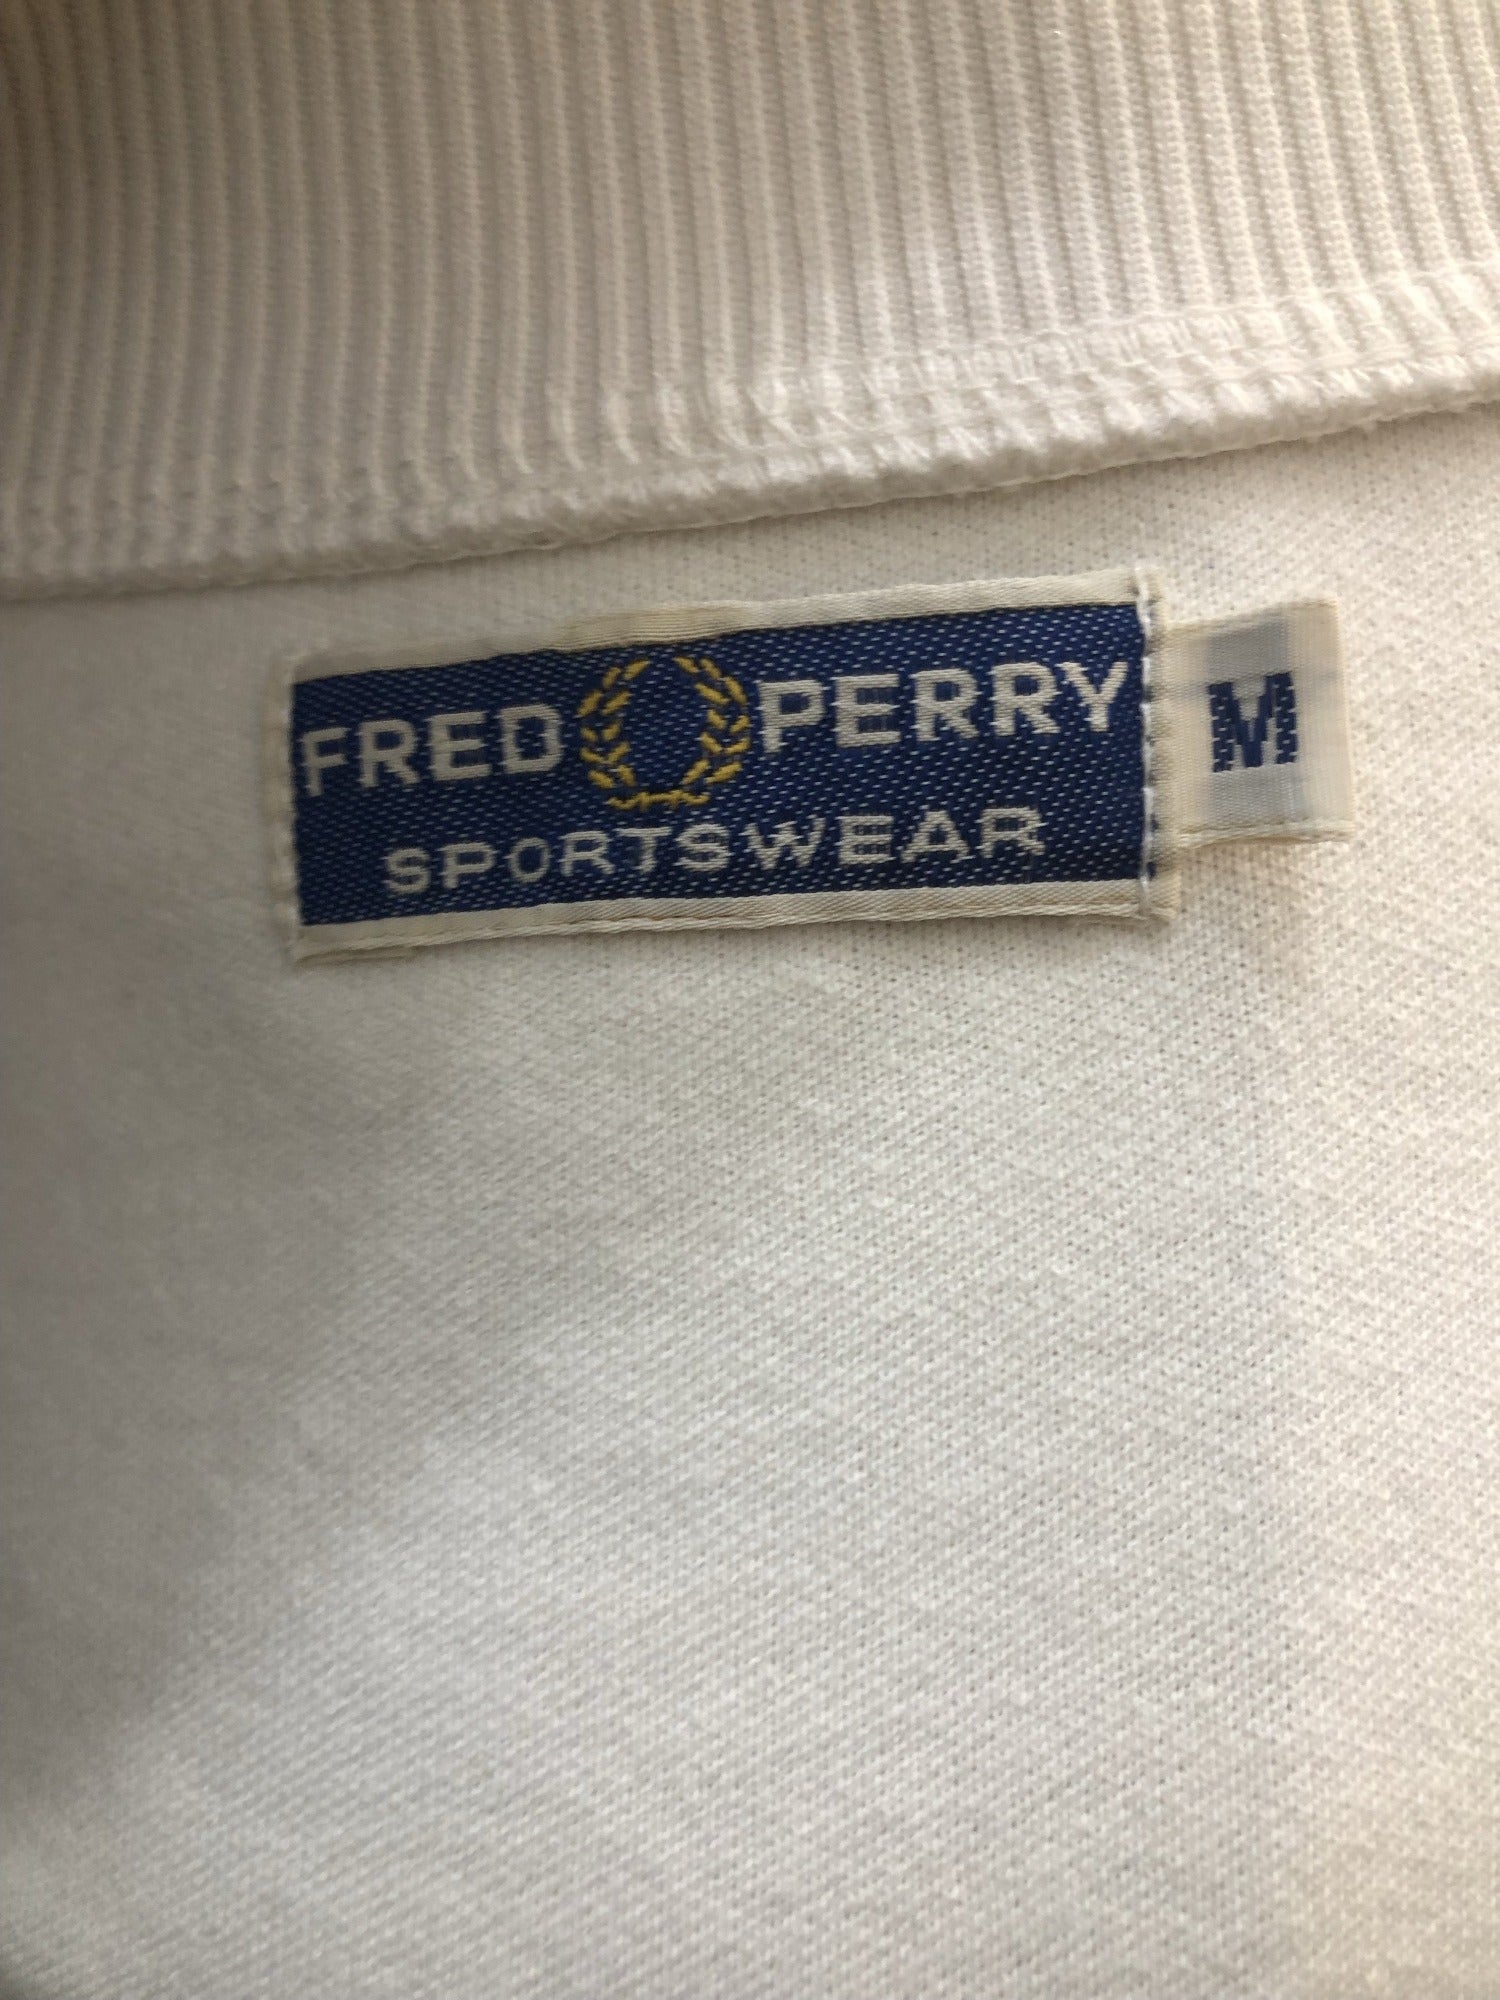 Fred Perry Sportswear Tracksuit Top Black with Logo Strip on Arms - Size M  - Urban Village Vintage – UrbanVillageVintage